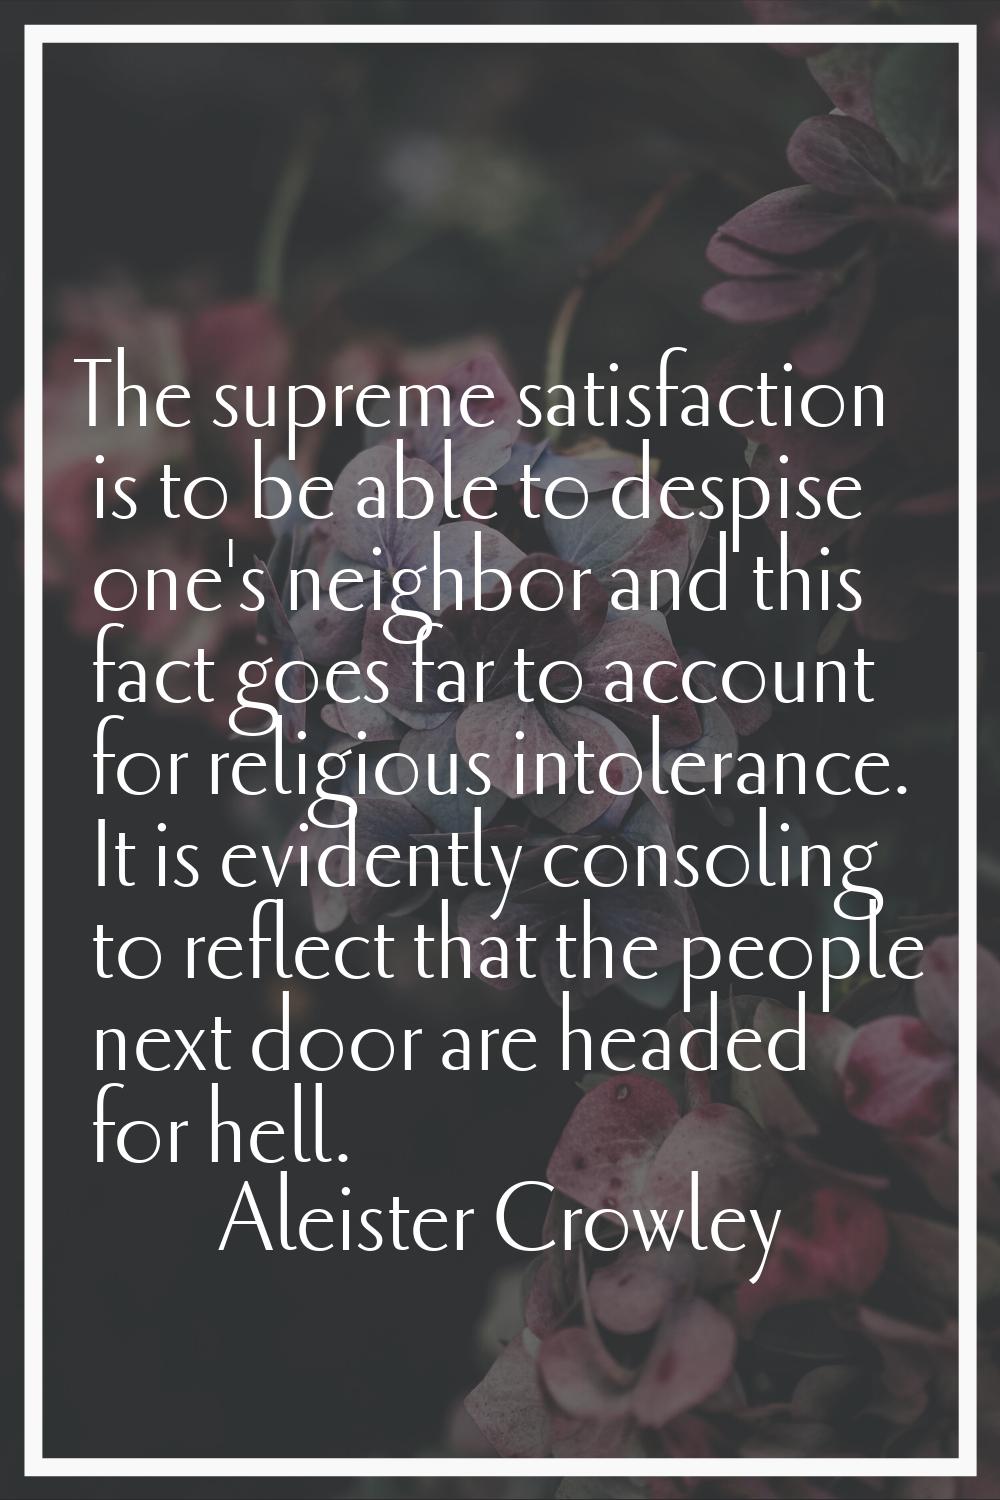 The supreme satisfaction is to be able to despise one's neighbor and this fact goes far to account 